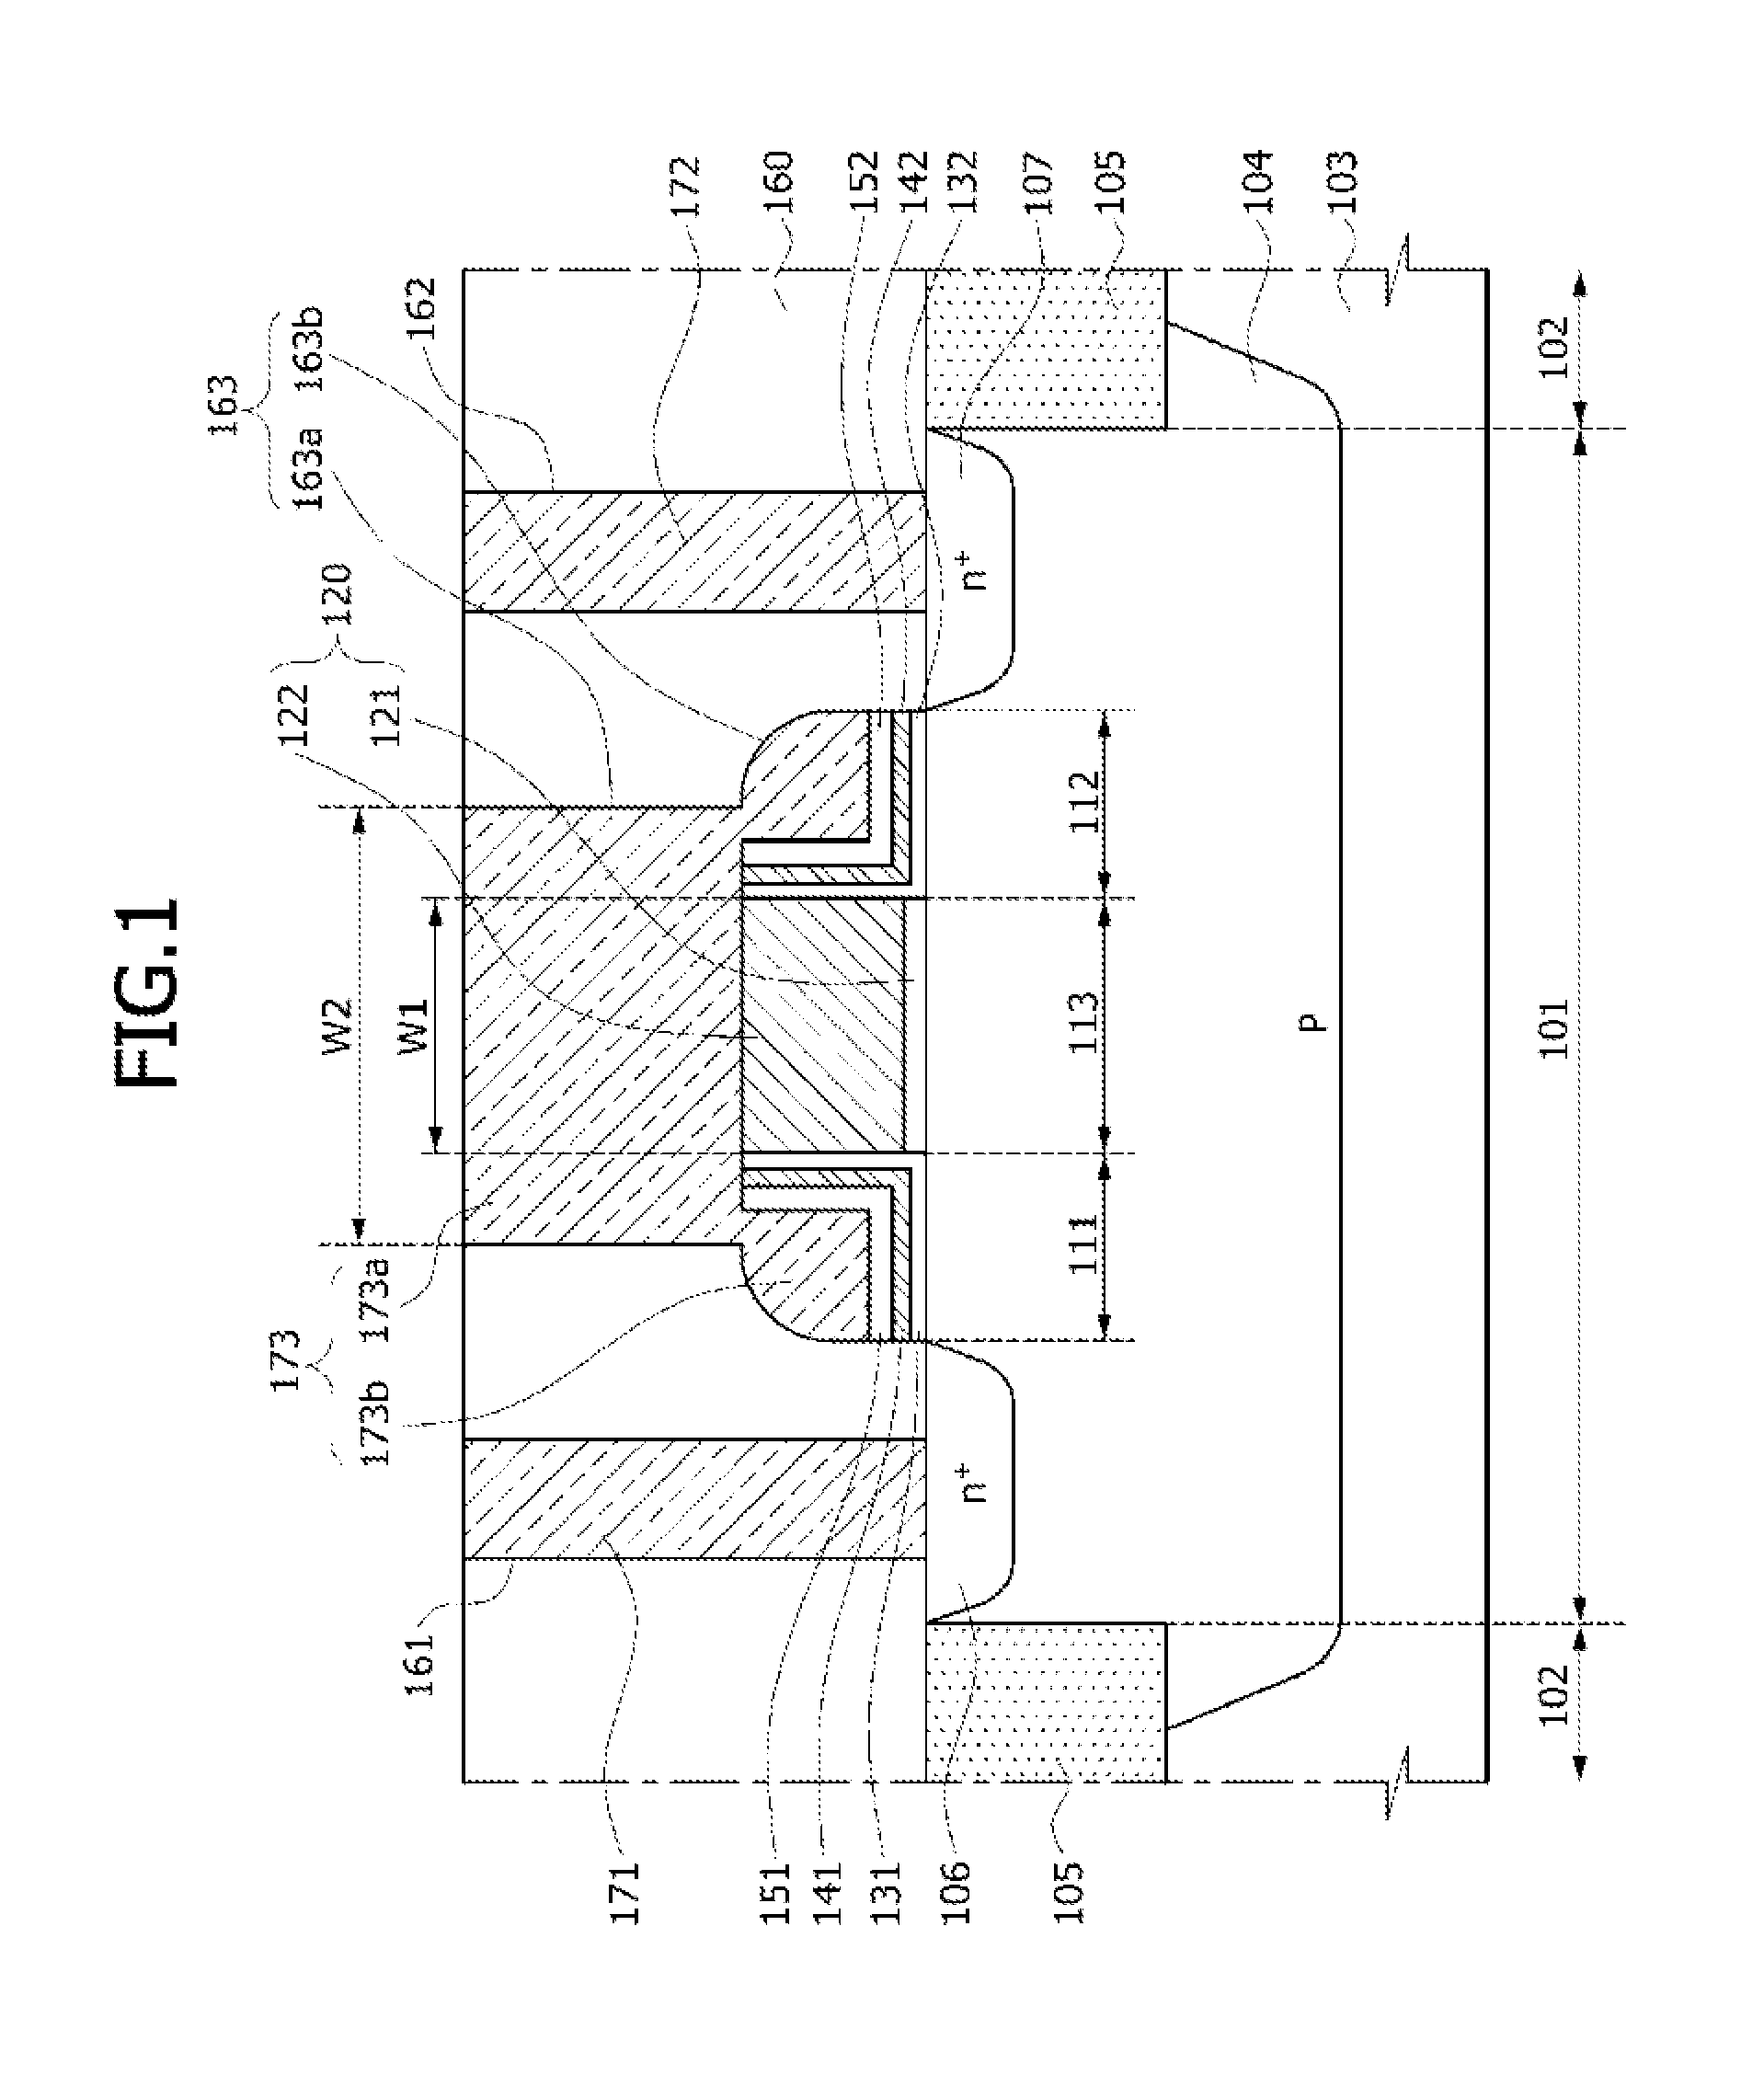 Charge trapping nonvolatile memory devices, methods of fabricating the same, and methods of operating the same